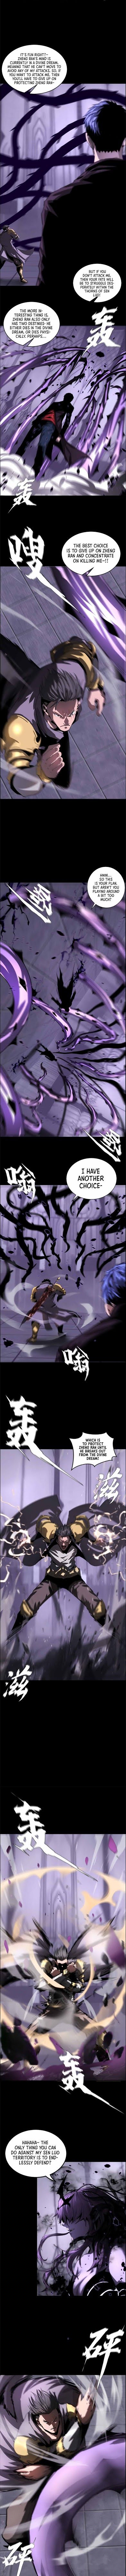 The Blade Of Evolution-Walking Alone In The Dungeon Chapter 43 page 5